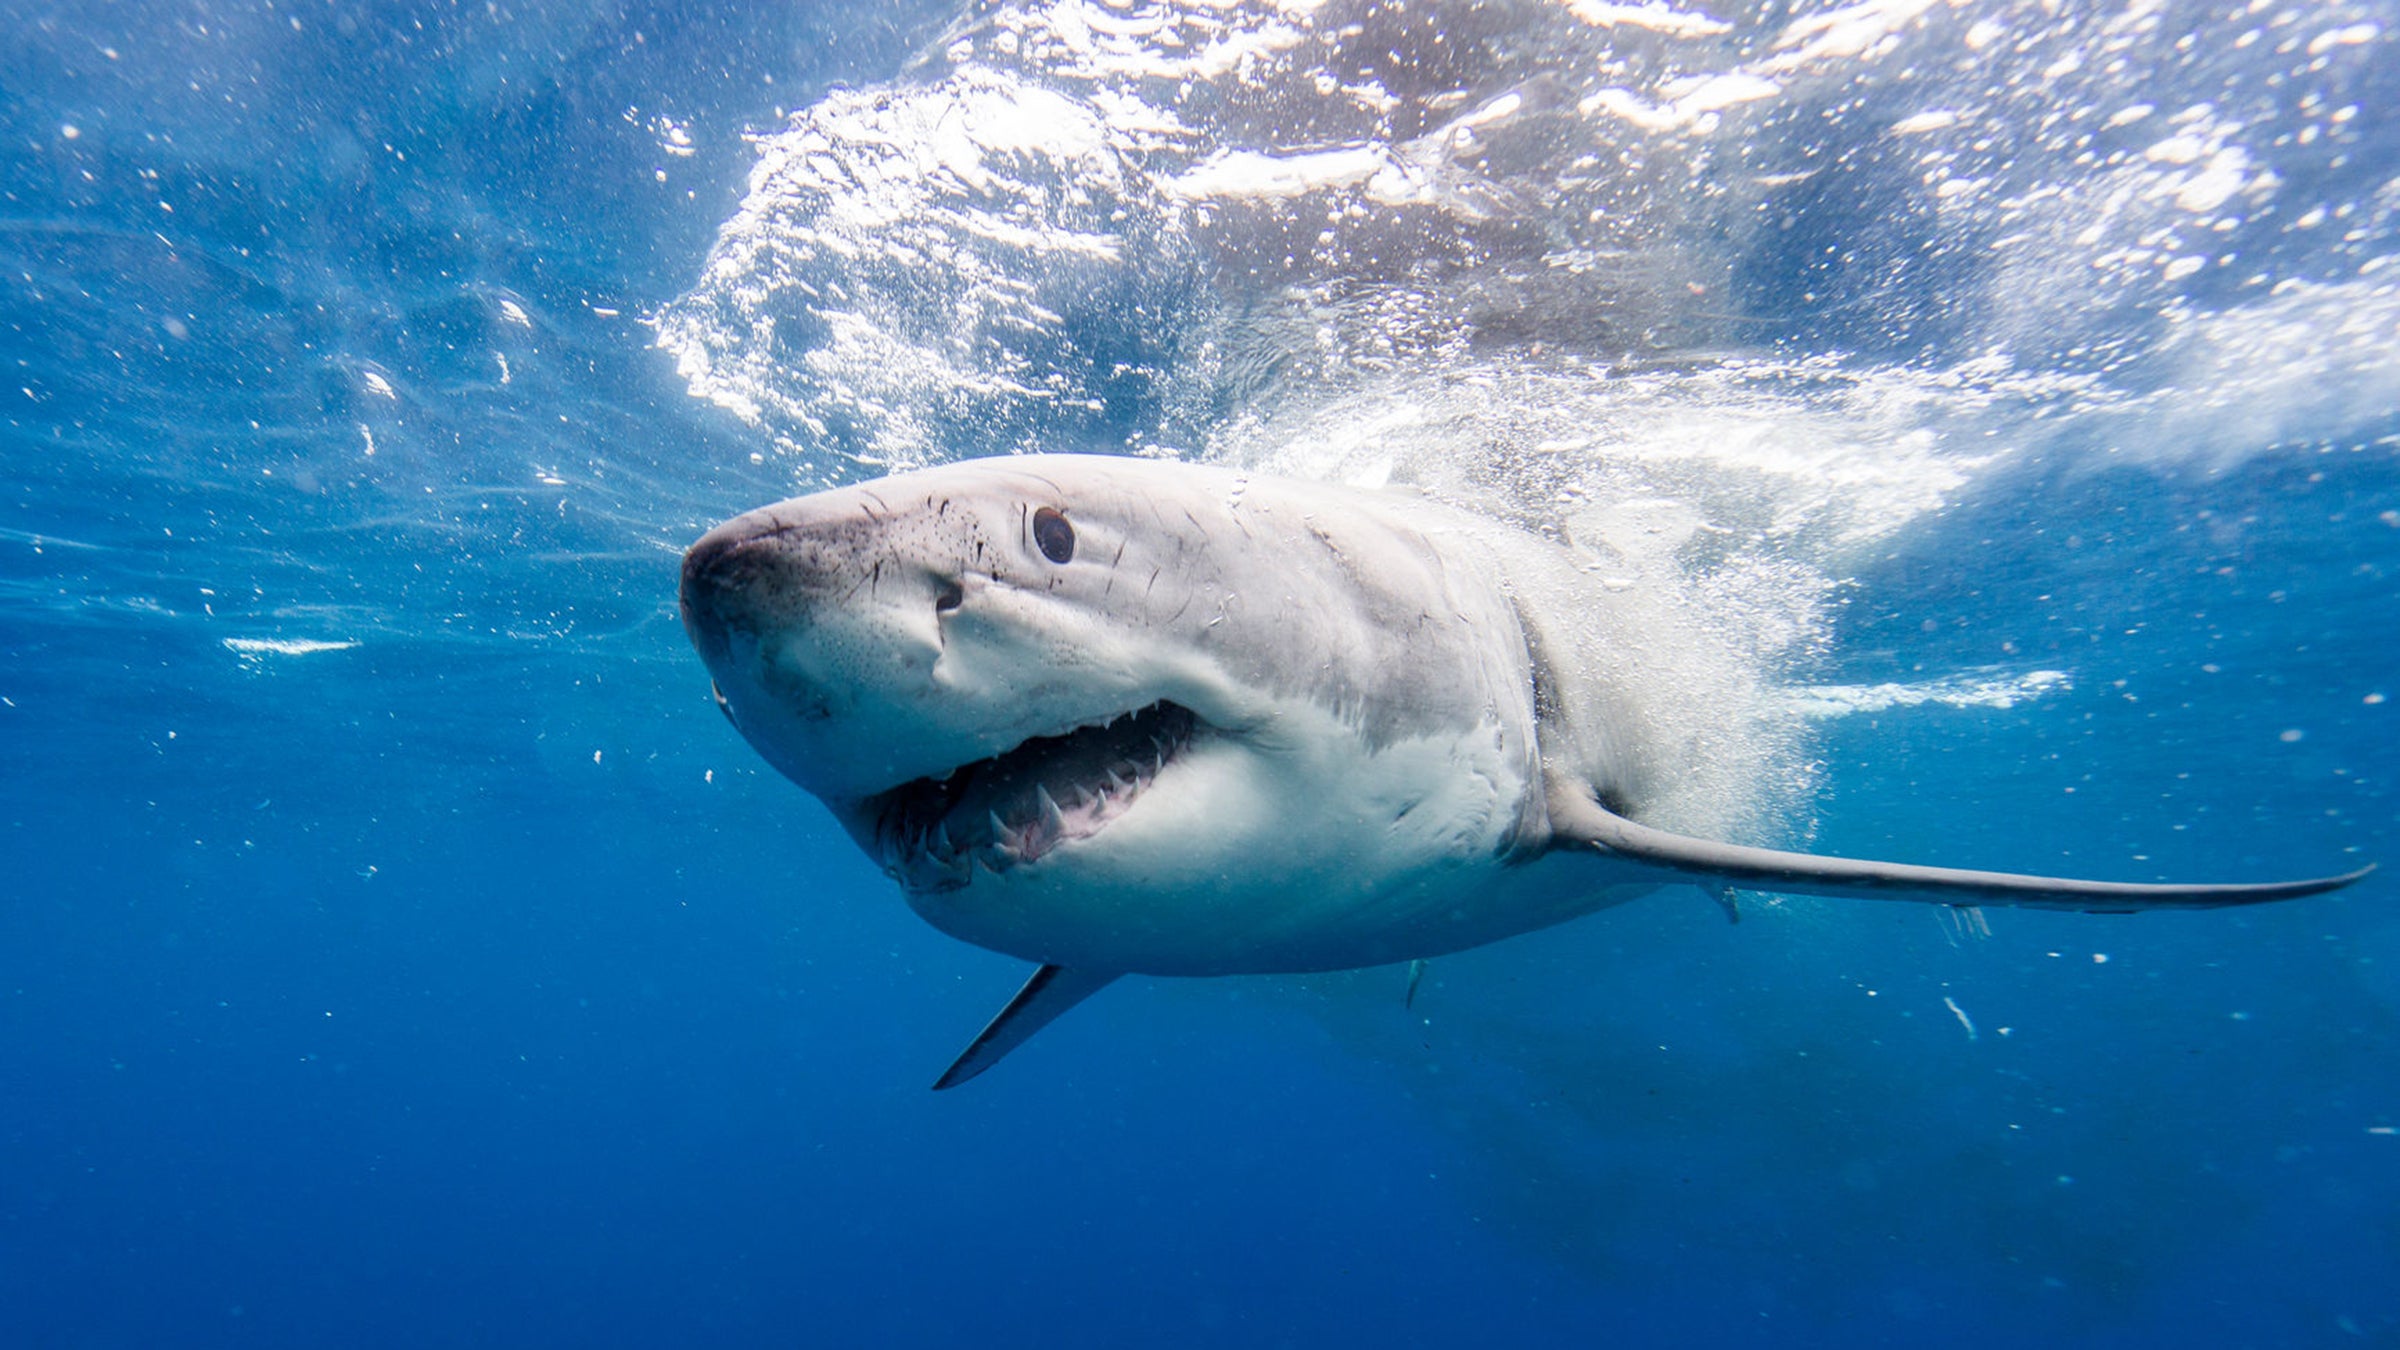 Rare shark attack in Maine may be linked to marine protection